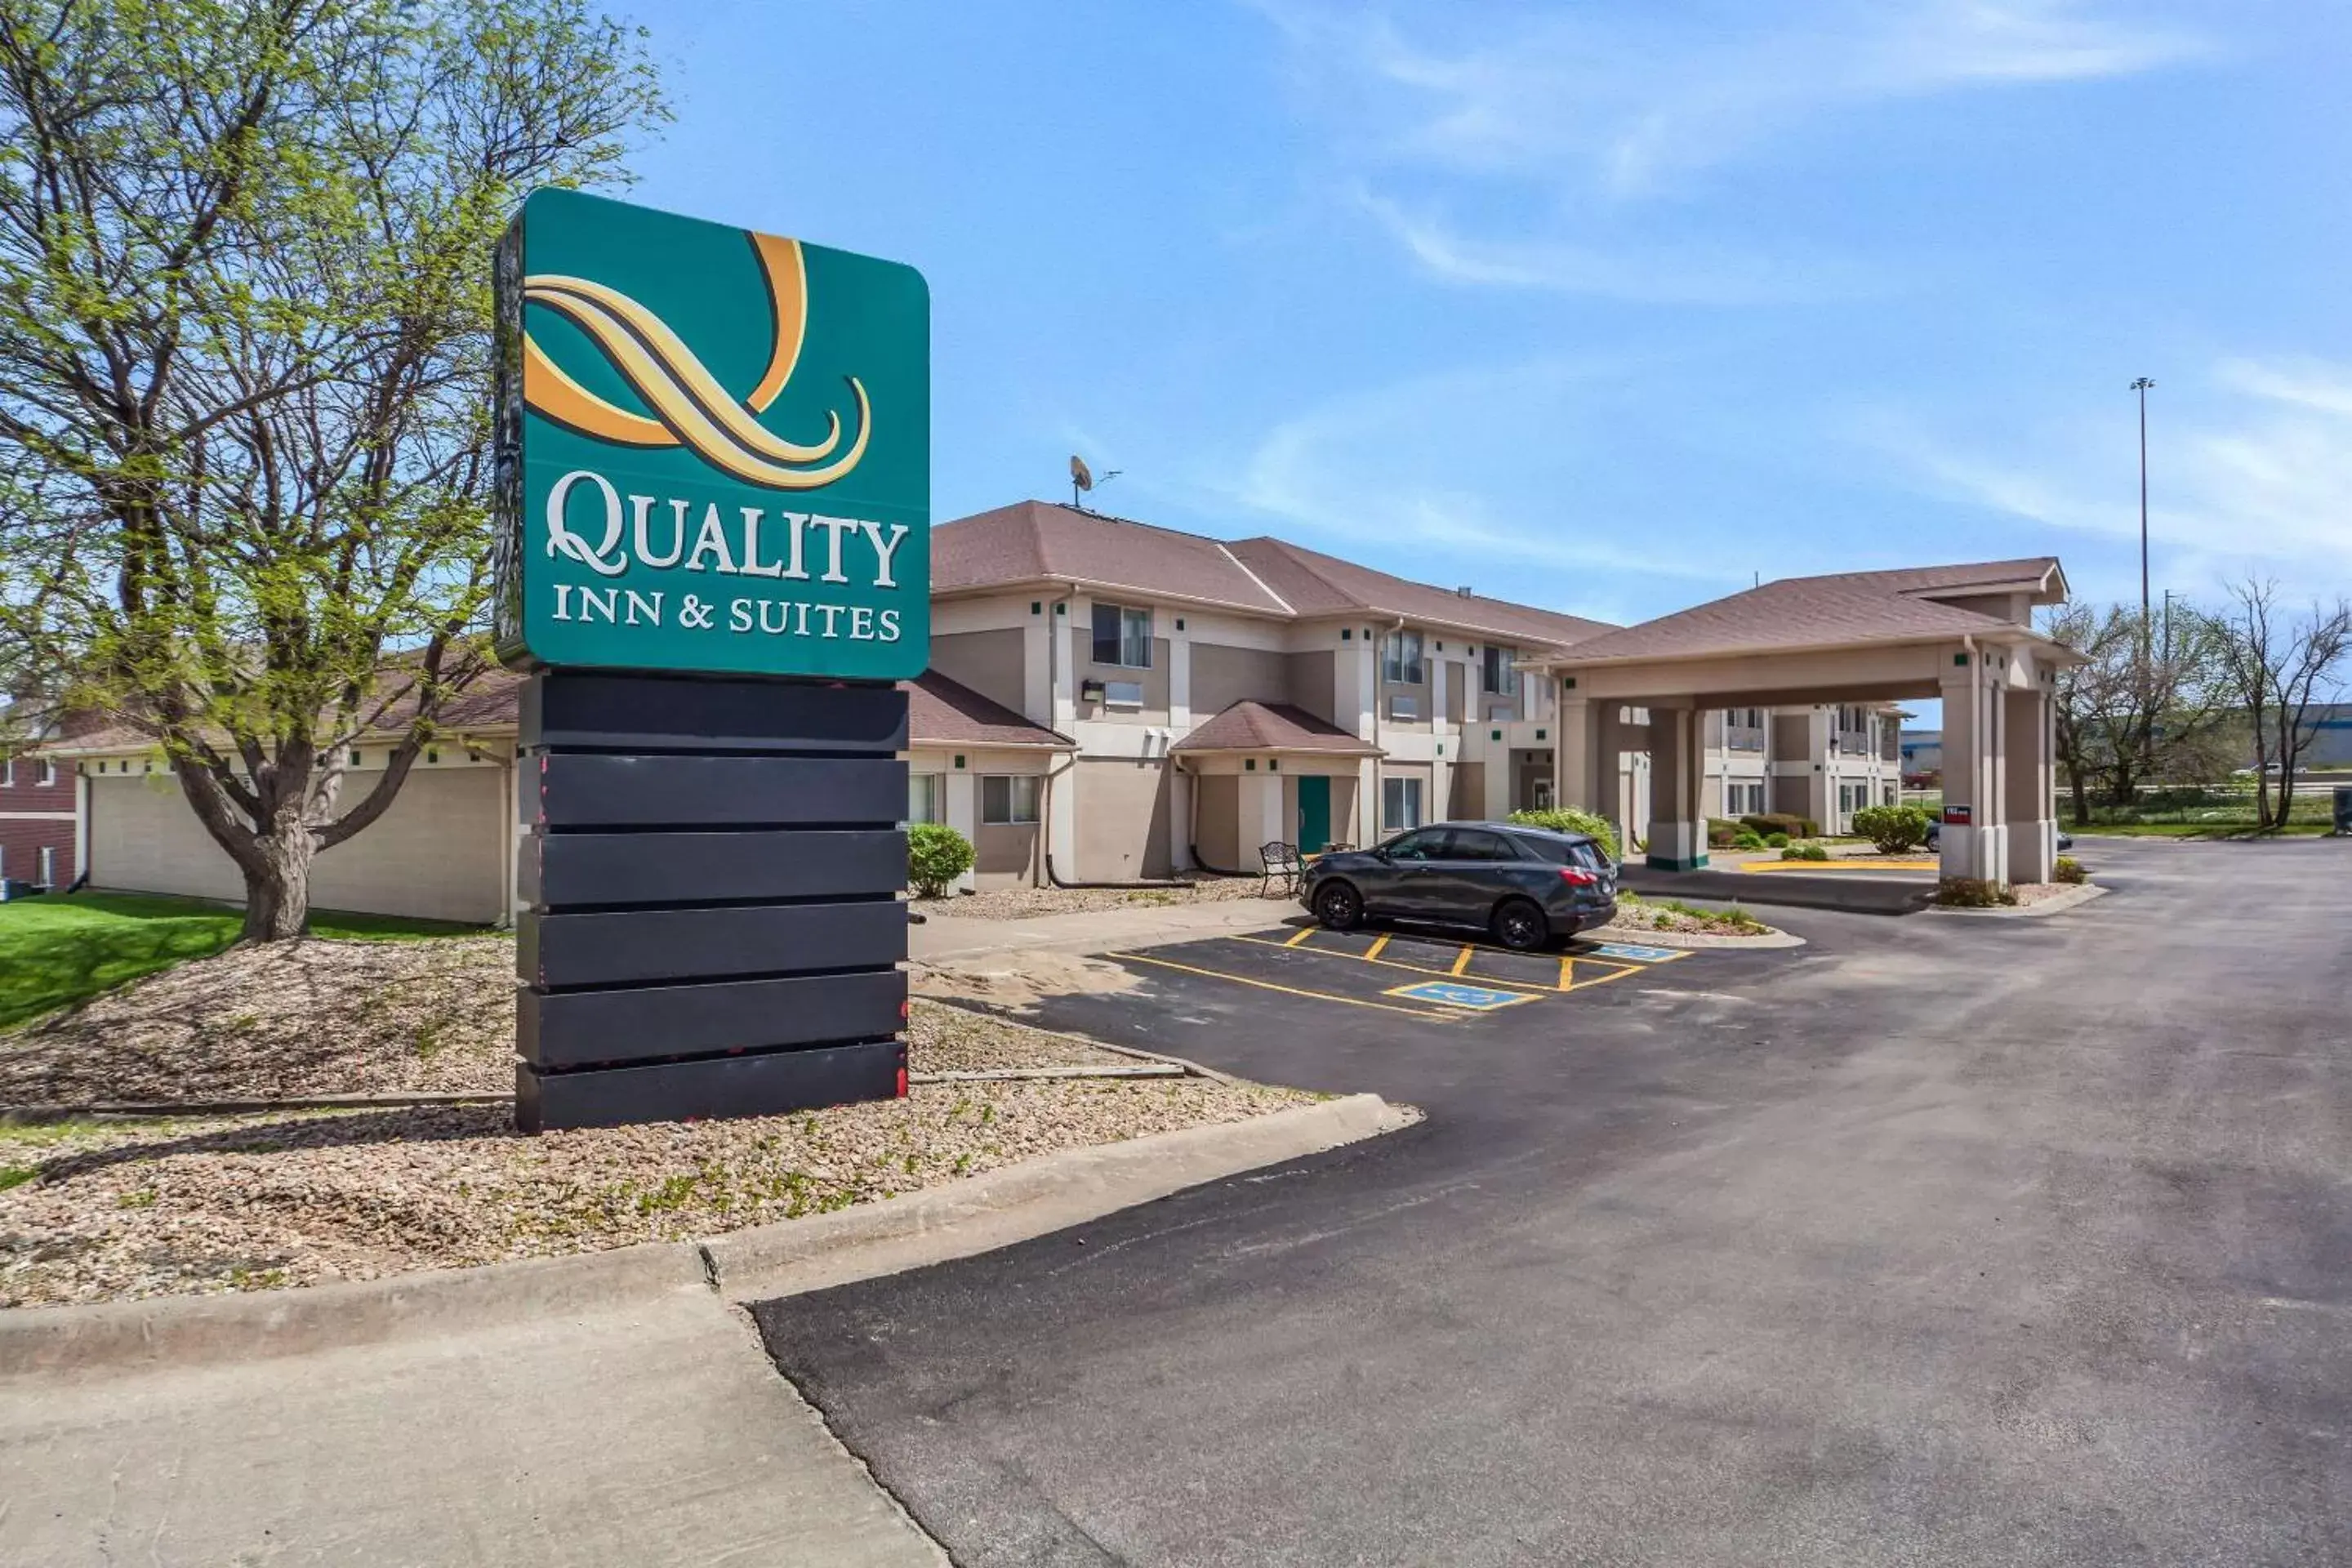 Property Building in Quality Inn & Suites West Omaha - NE Linclon